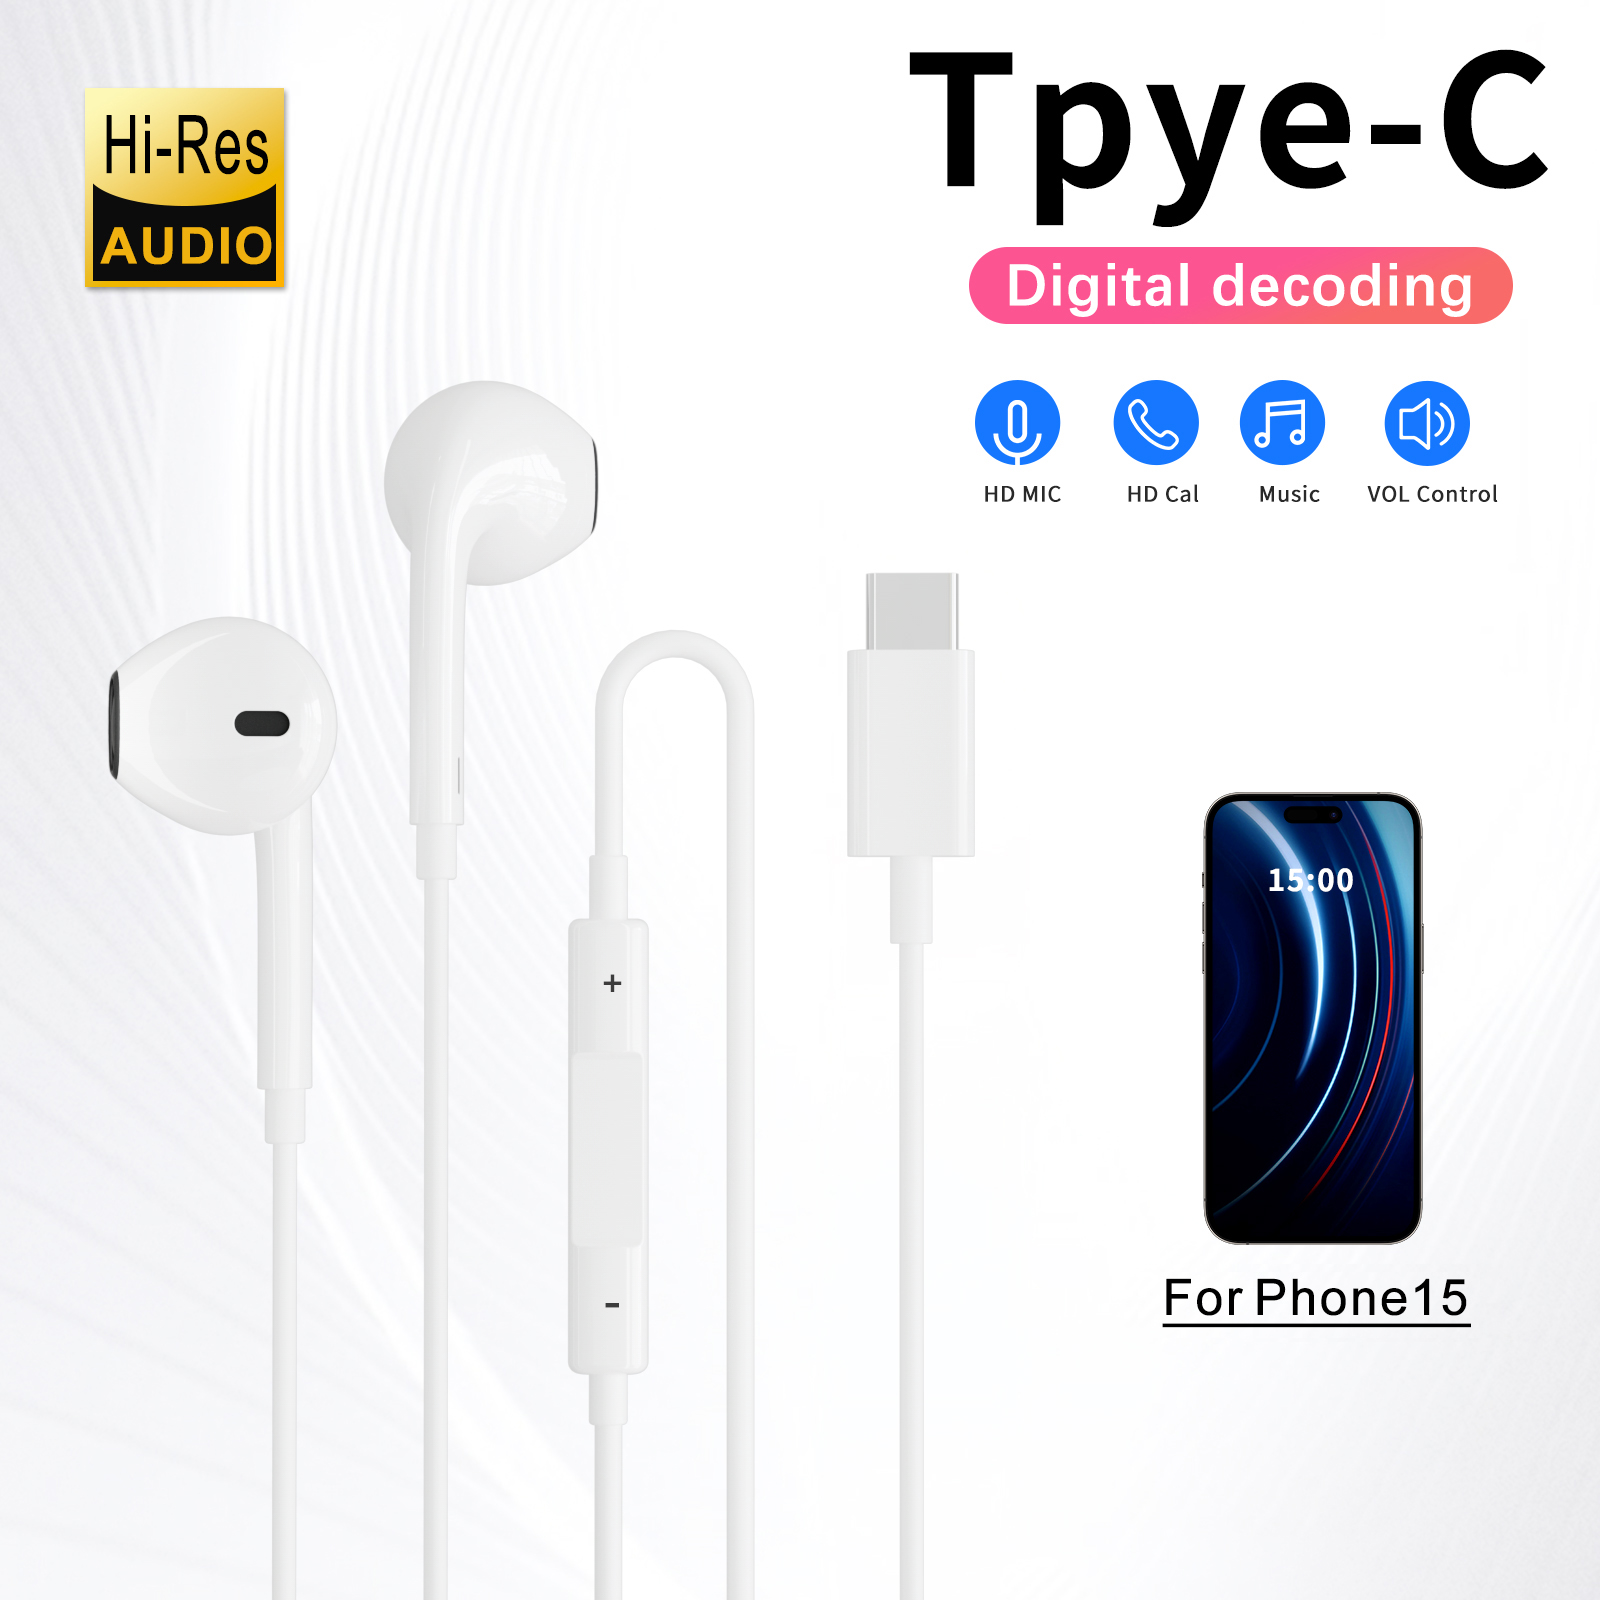 

Usb-c Plug Headphones Wired Ear Buds With Built-in Remote To Control Music, Phone Calls, And Volume, Type C Earbuds For Iphone 15 Pro Maxsuitable For All Usb-c Interface Devices.